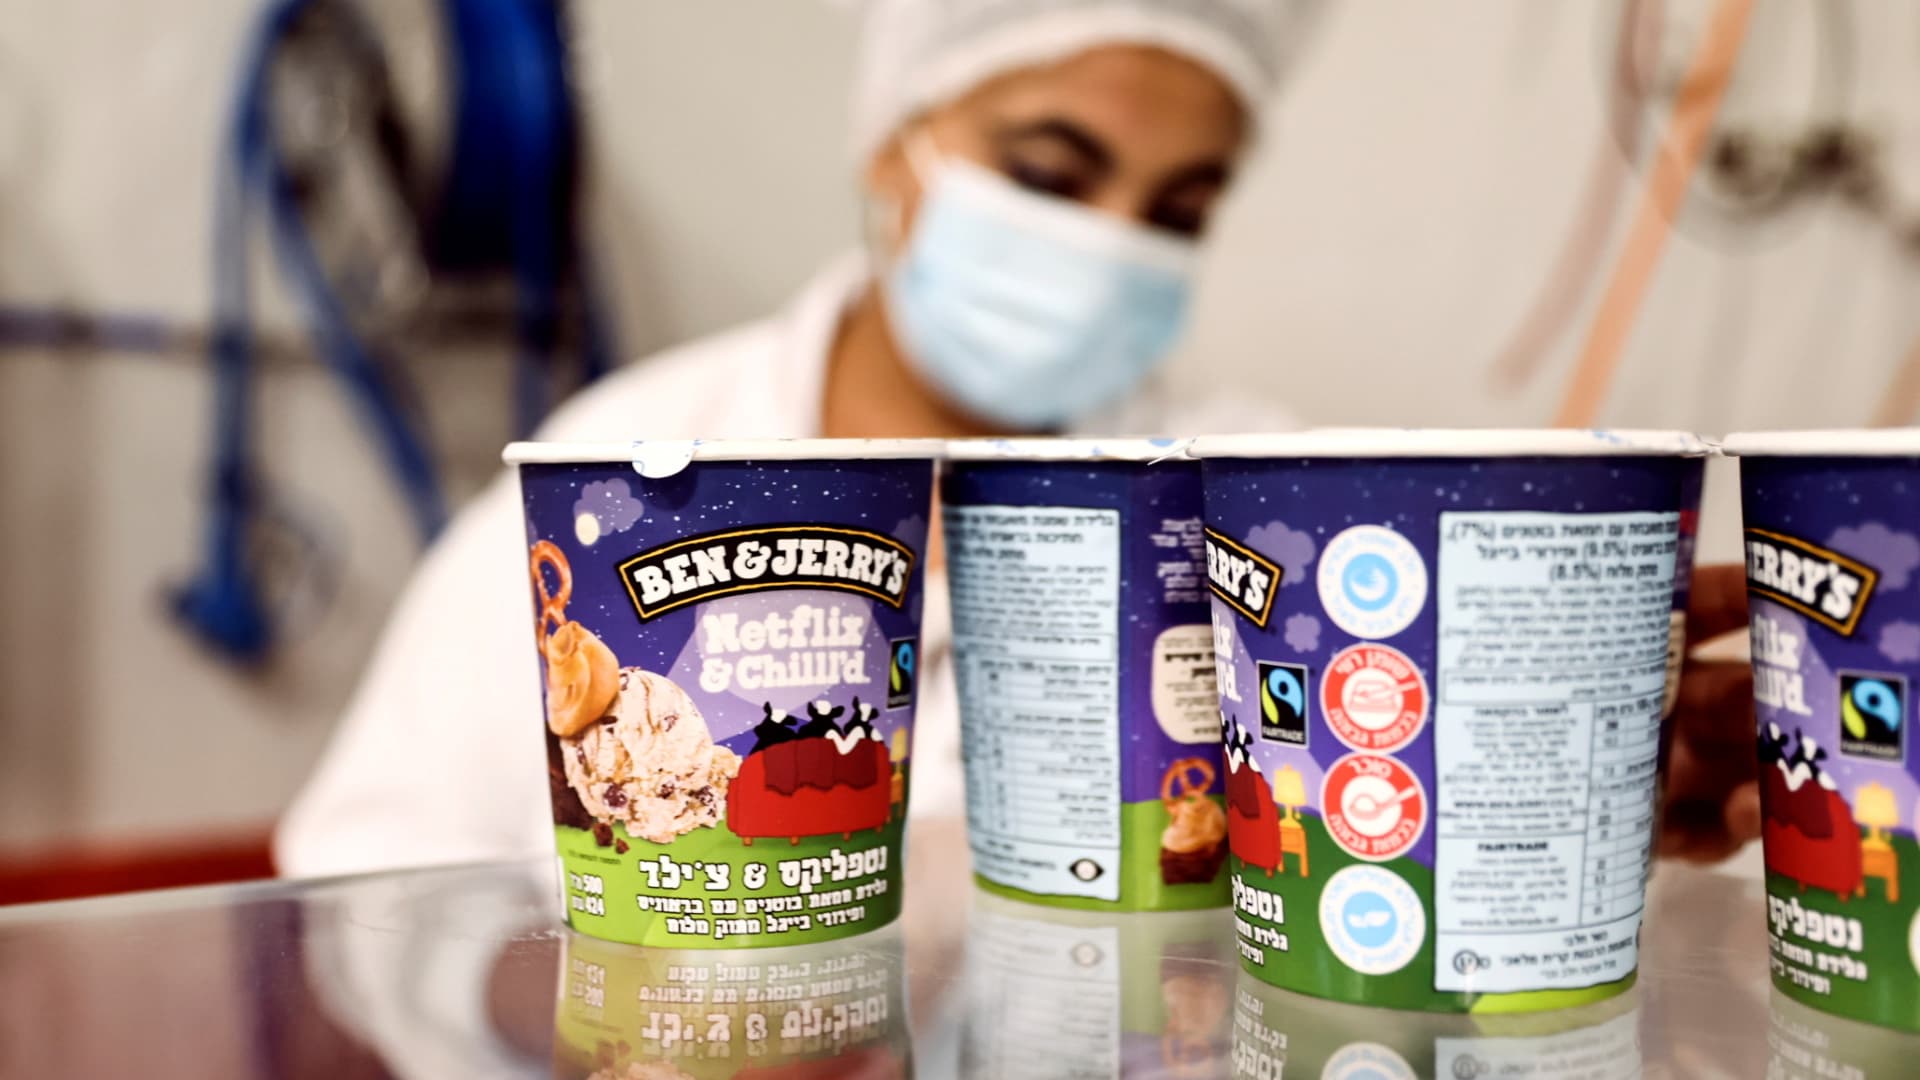 Tubs of ice-cream are seen as a laborer works at Ben & Jerry's factory in Be'er Tuvia, Israel July 20, 2021.